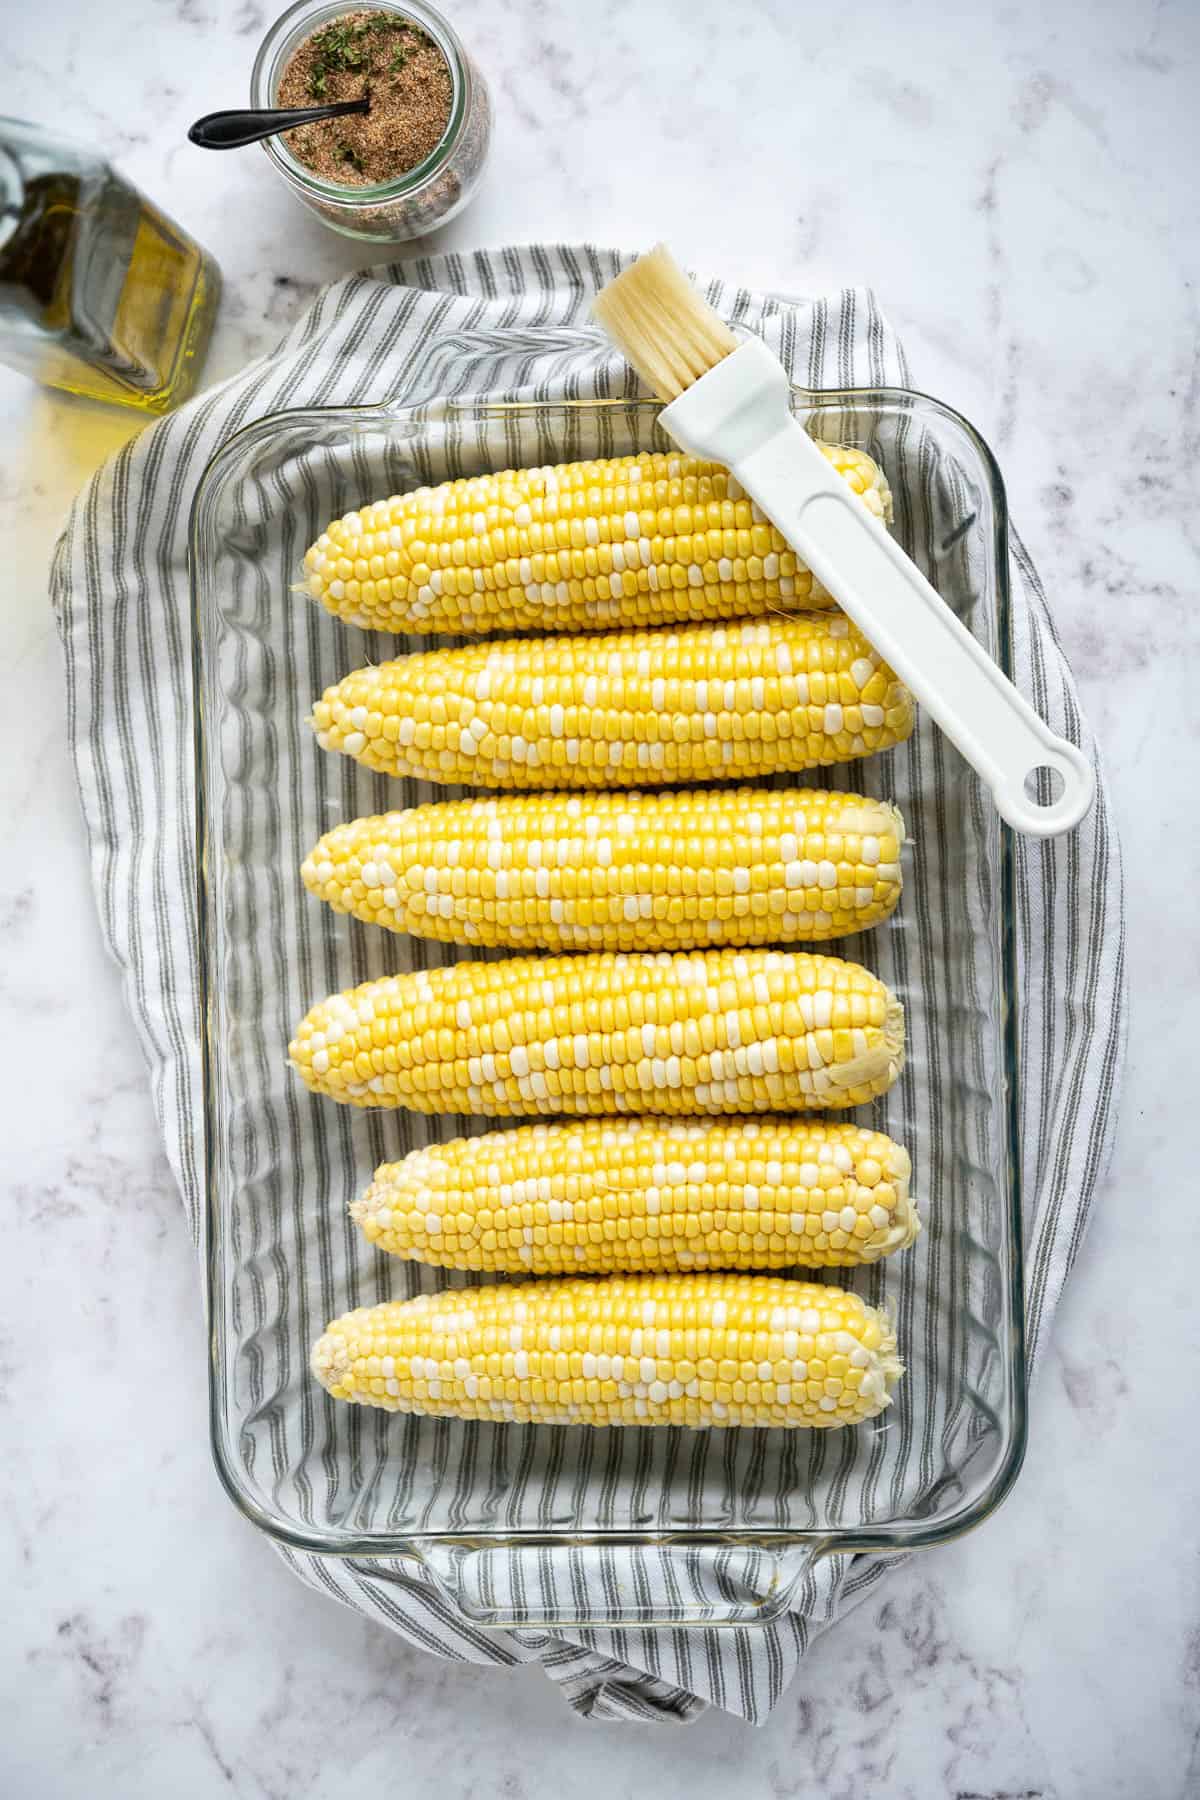 Ears of yellow corn in a glass baking dish with a pastry brush resting on the edge.